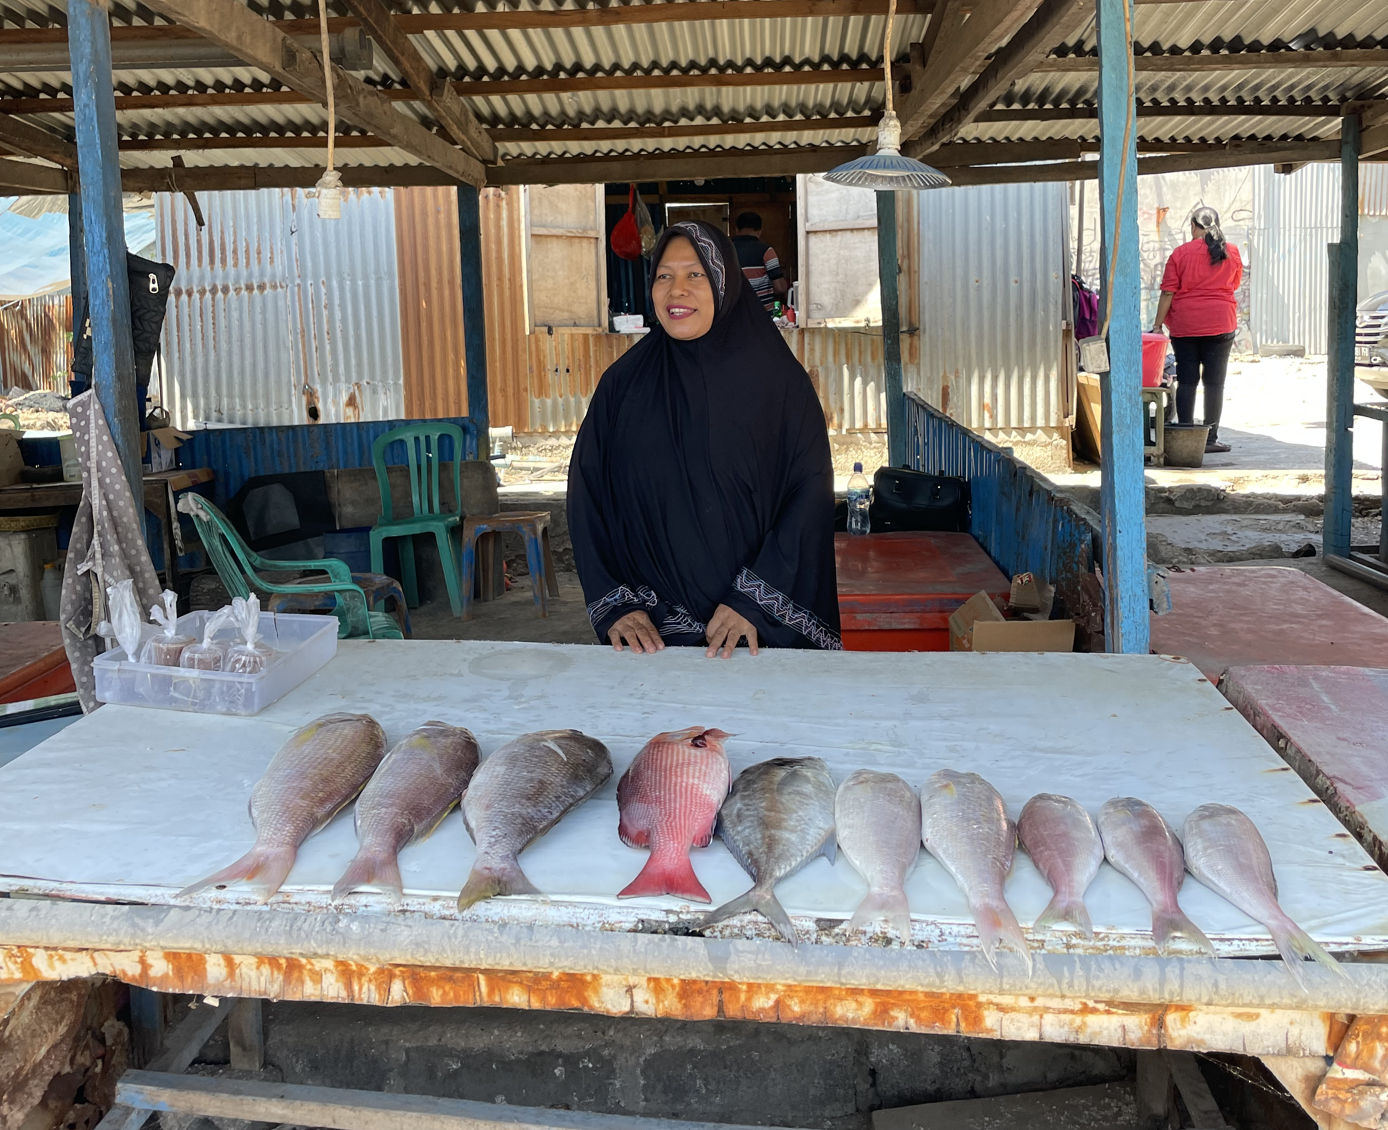 Our standing at her fish market stall